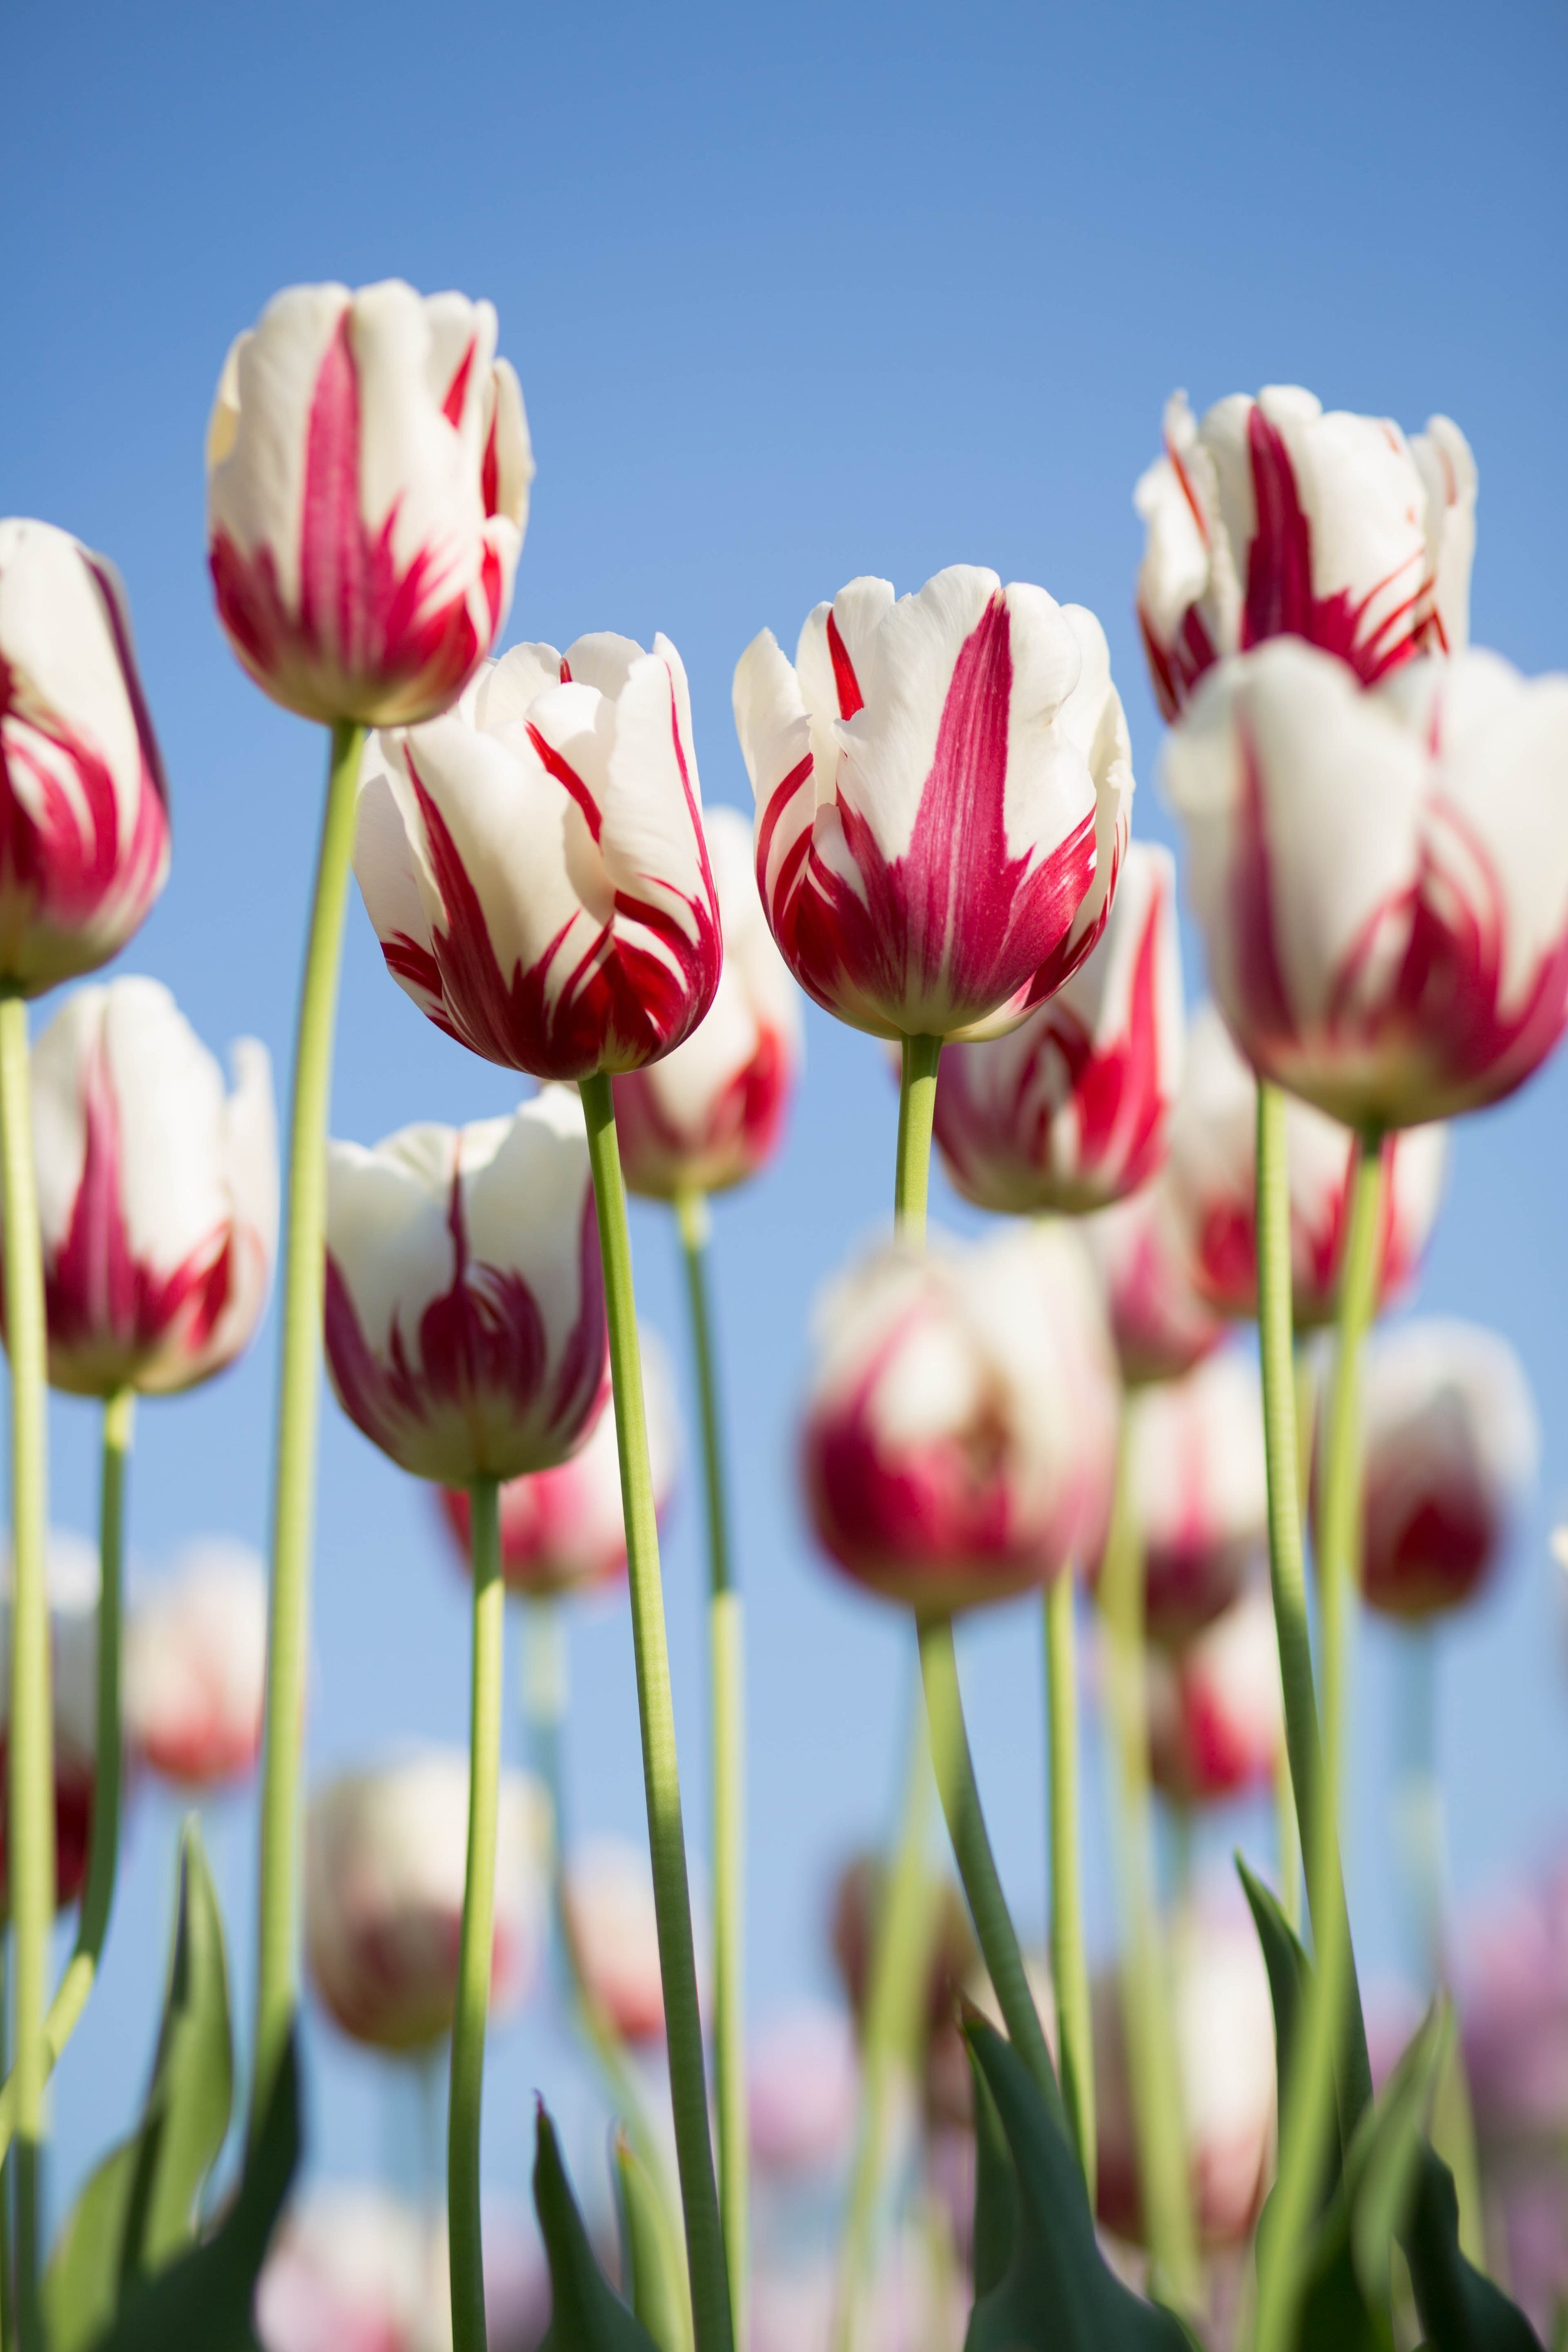 Tulips - Did you know?!